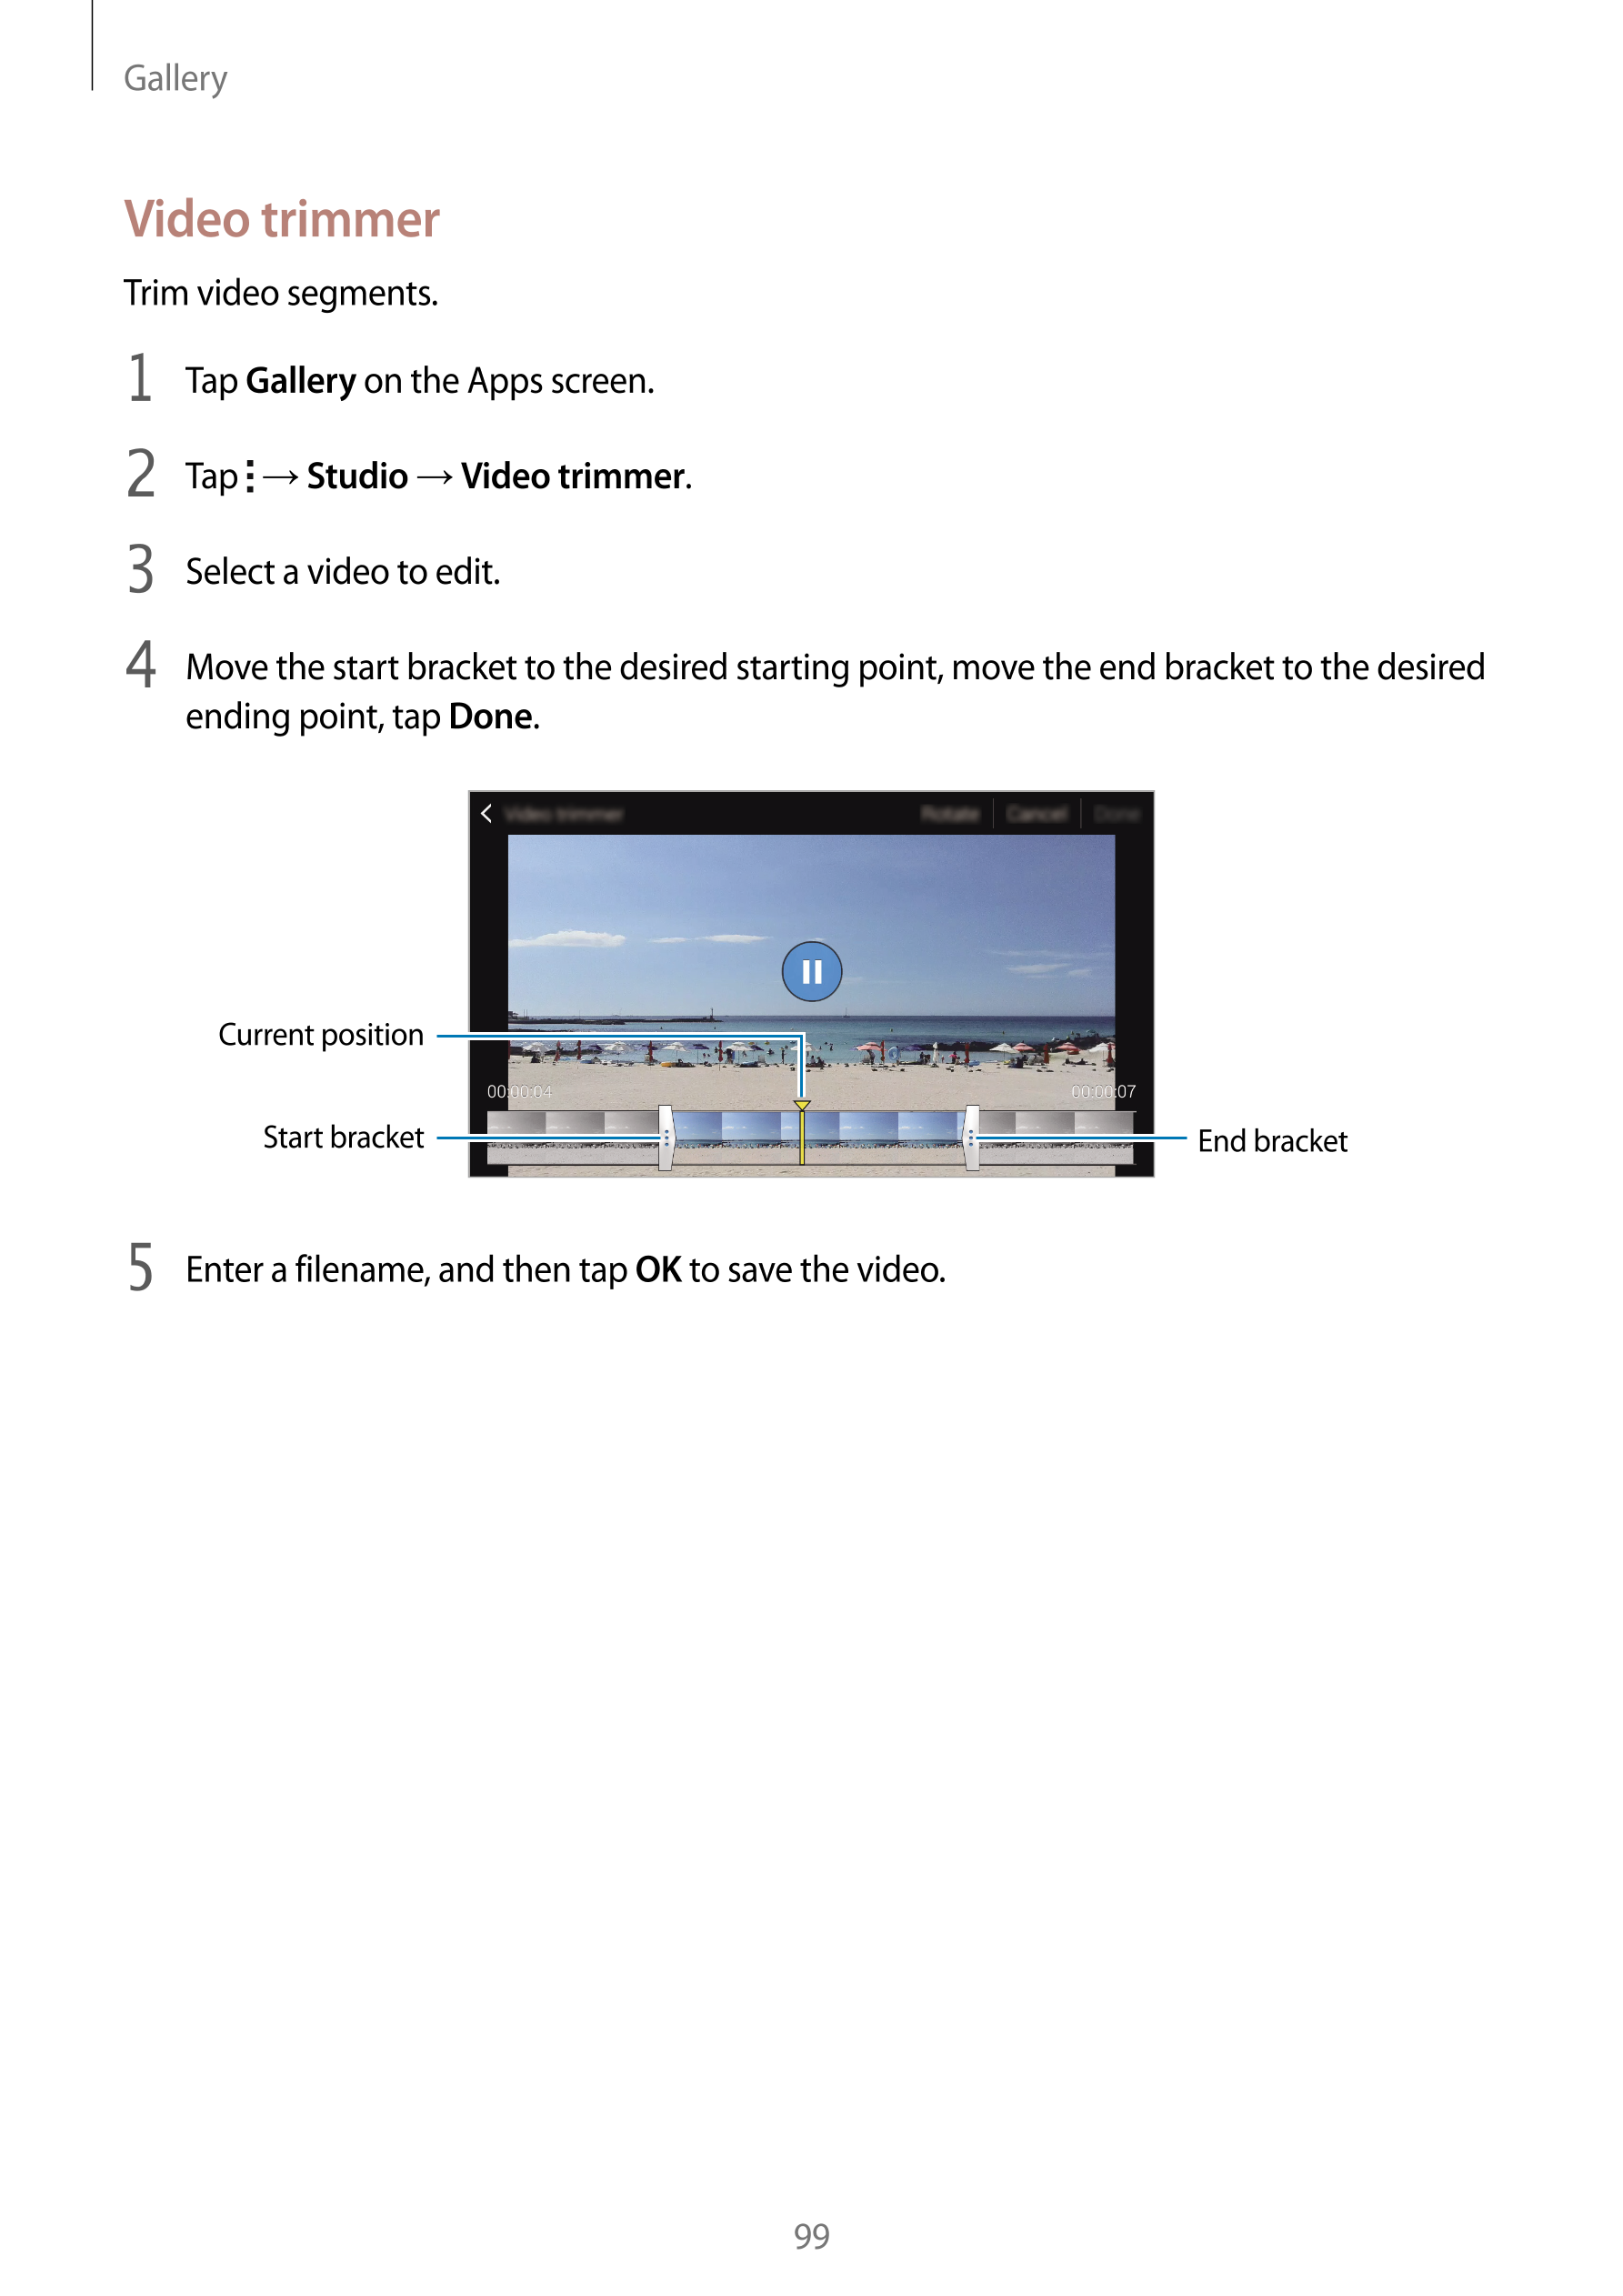 Gallery
Video trimmer
Trim video segments.
1  Tap  Gallery on the Apps screen.
2  Tap    →  Studio  →  Video trimmer.
3  Select 